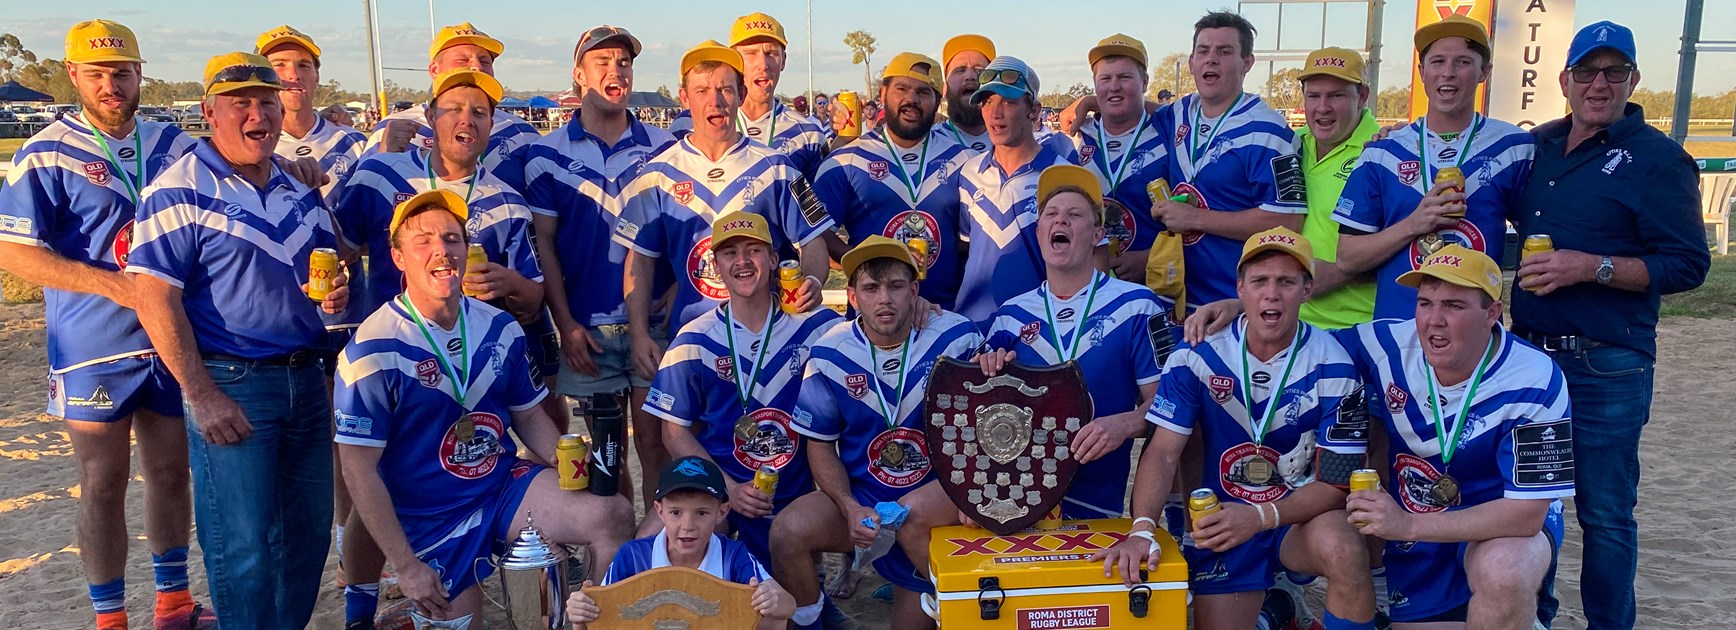 Roma hosts magic weekend of finals footy